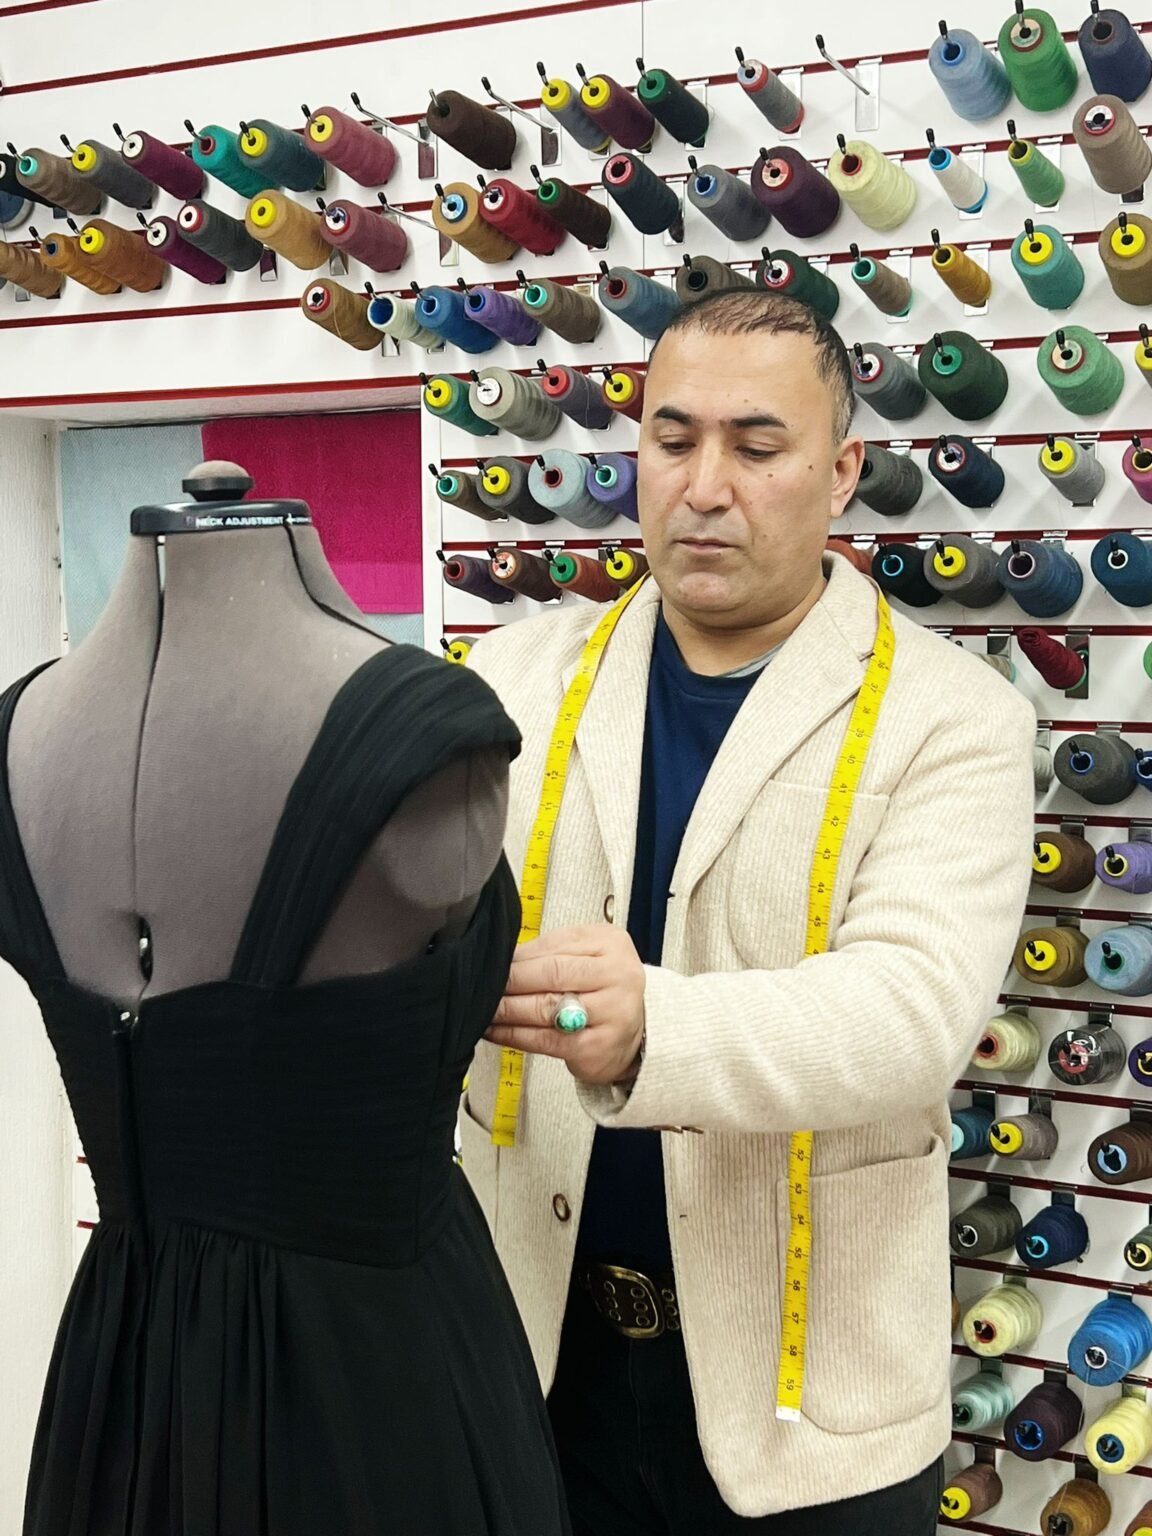 sewseam tailor taking size of a dress at sewseam shop - your best suit alterations shop